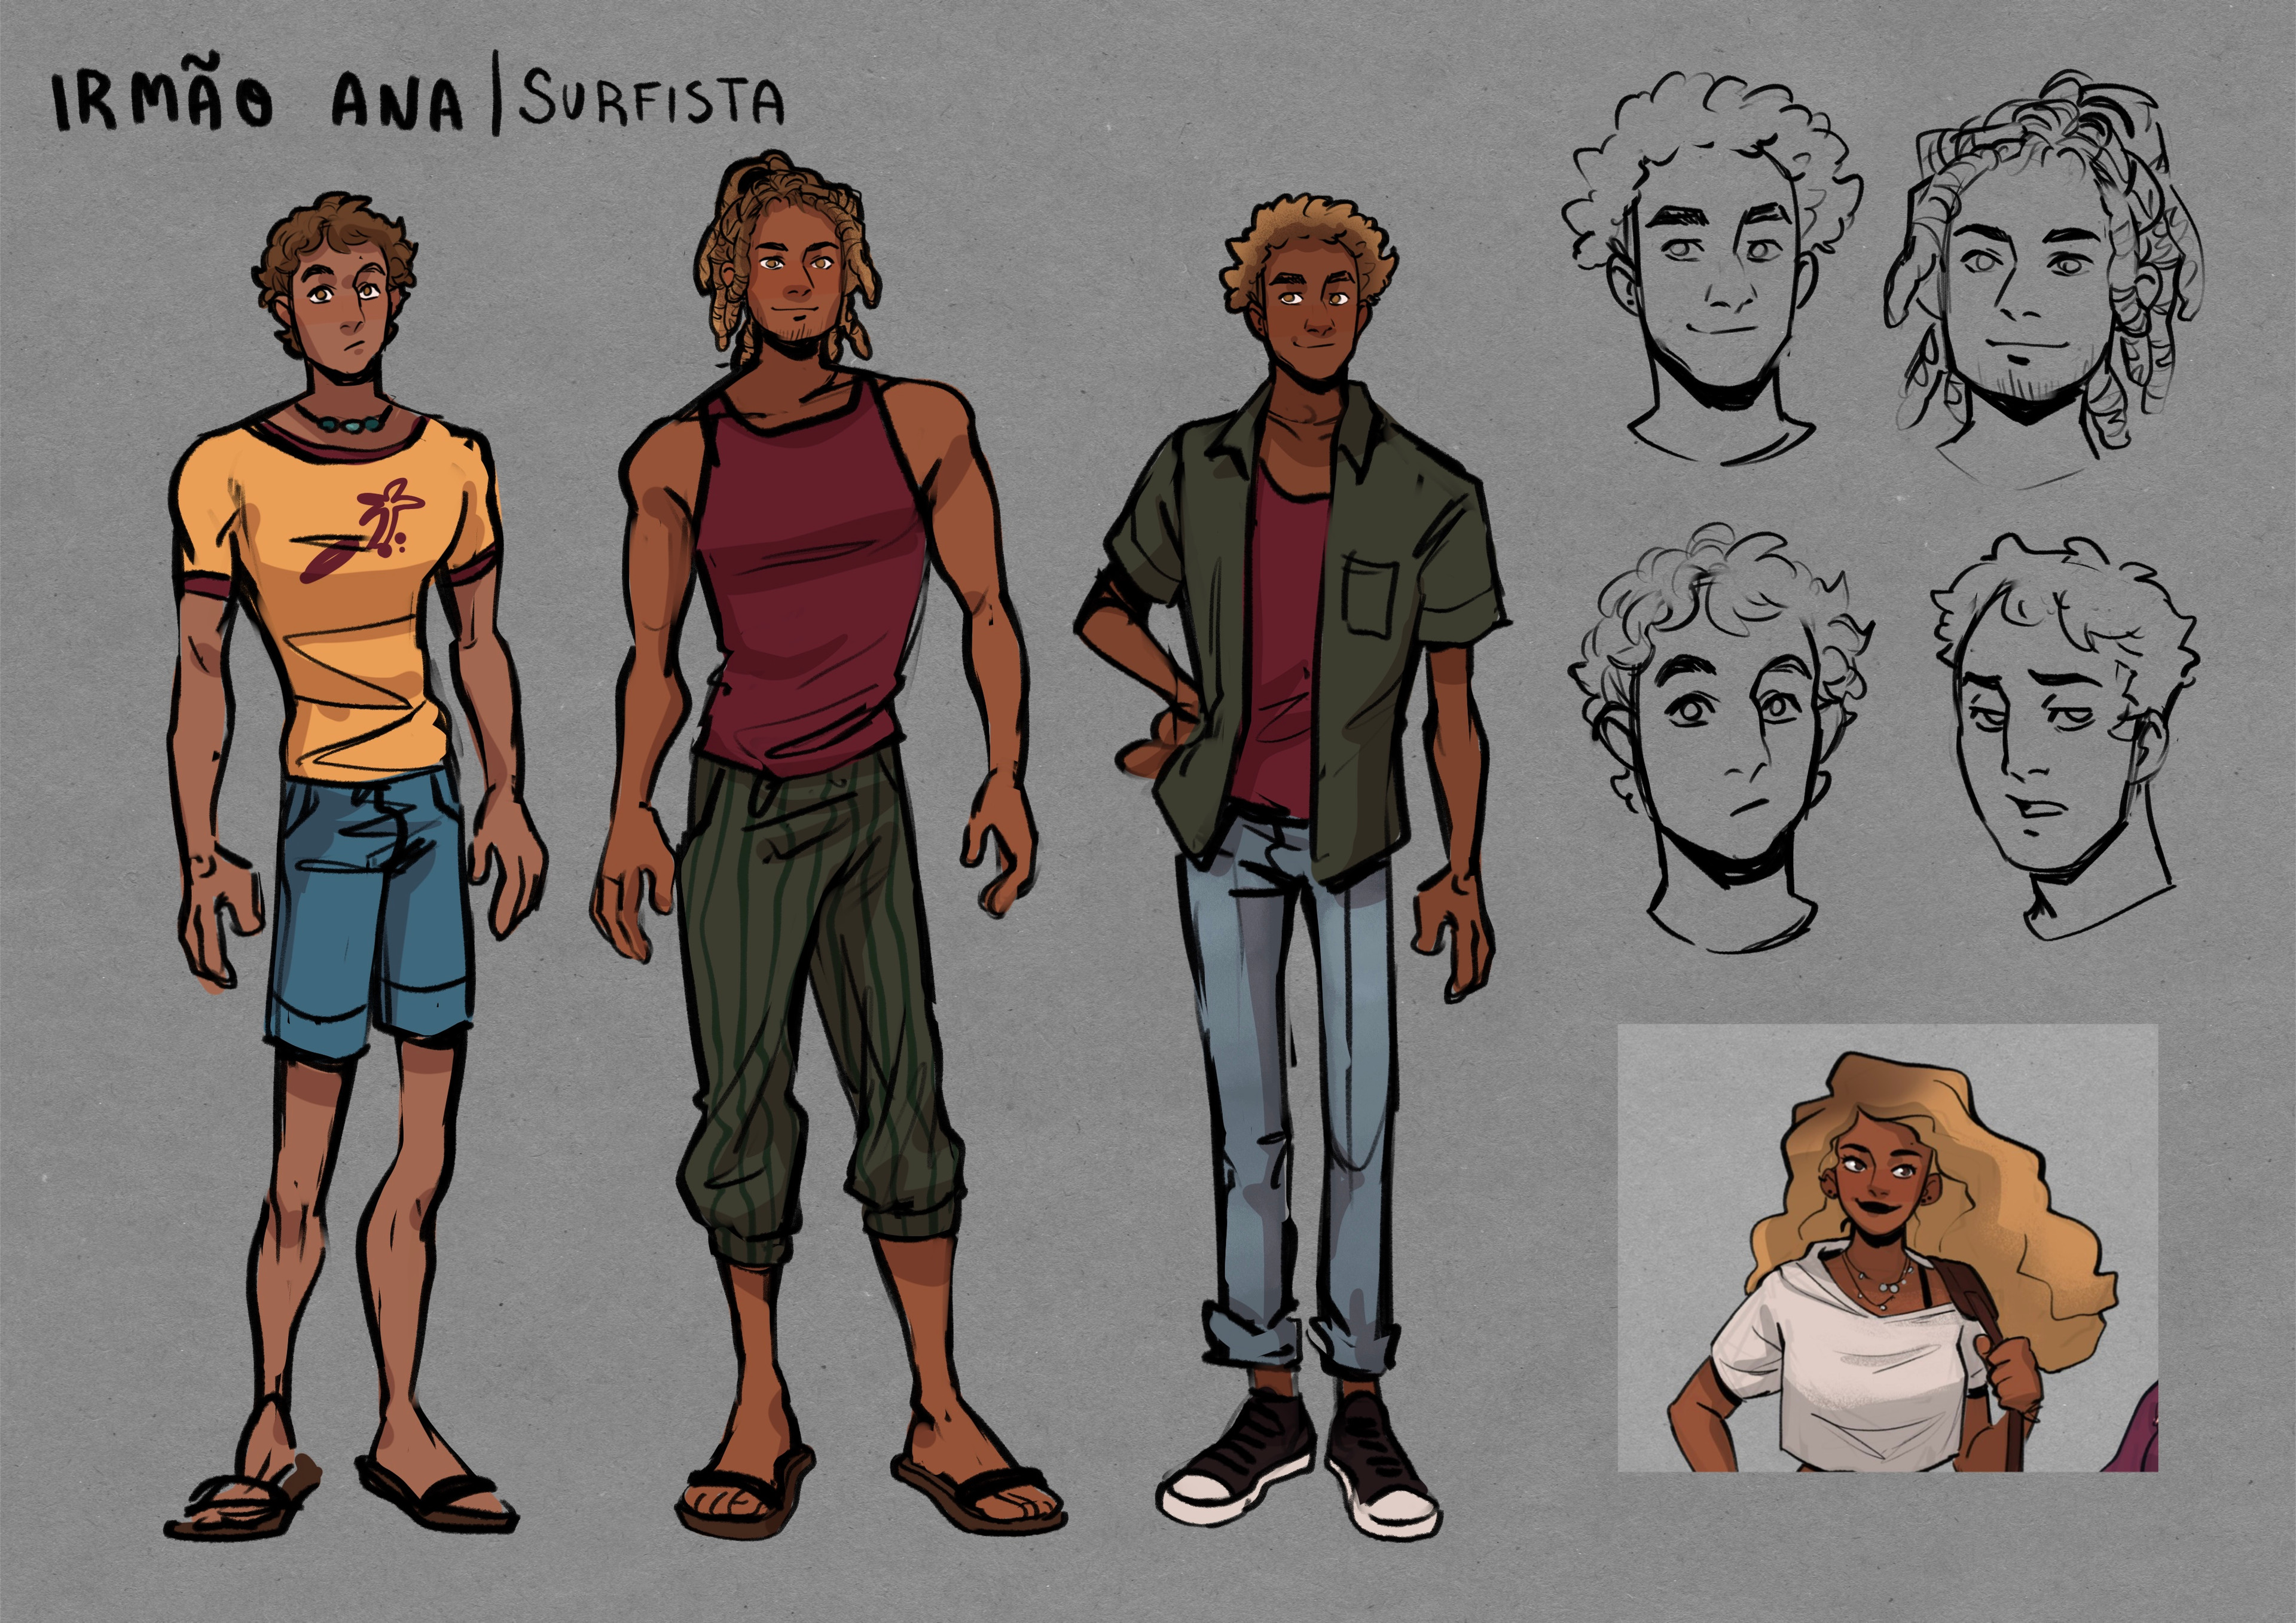 Ana’s brother exploration, a surfer and pretty chill dude.